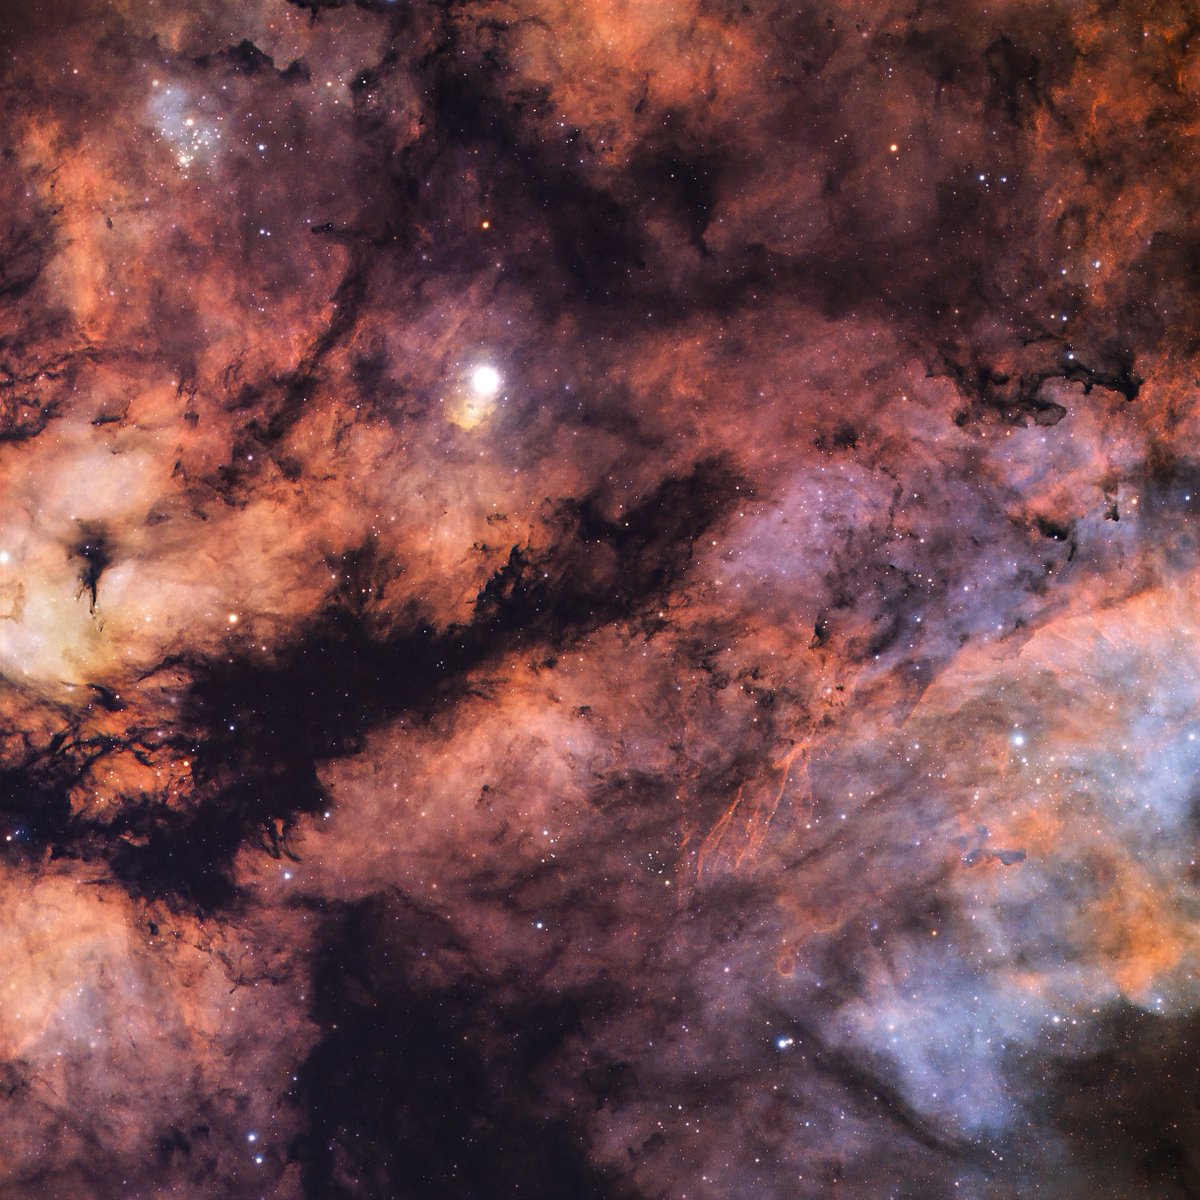 Cosmic chaos in Cygnus 📸 My take on the intense nebulae surrounding the center of Cygnus' cross. This is 6 hours of total exposure using my camera and telescope in the backyard! Camera: bit.ly/3ISZcsY Telescope: bit.ly/3S9hnQi Mount: bit.ly/4aP85jG